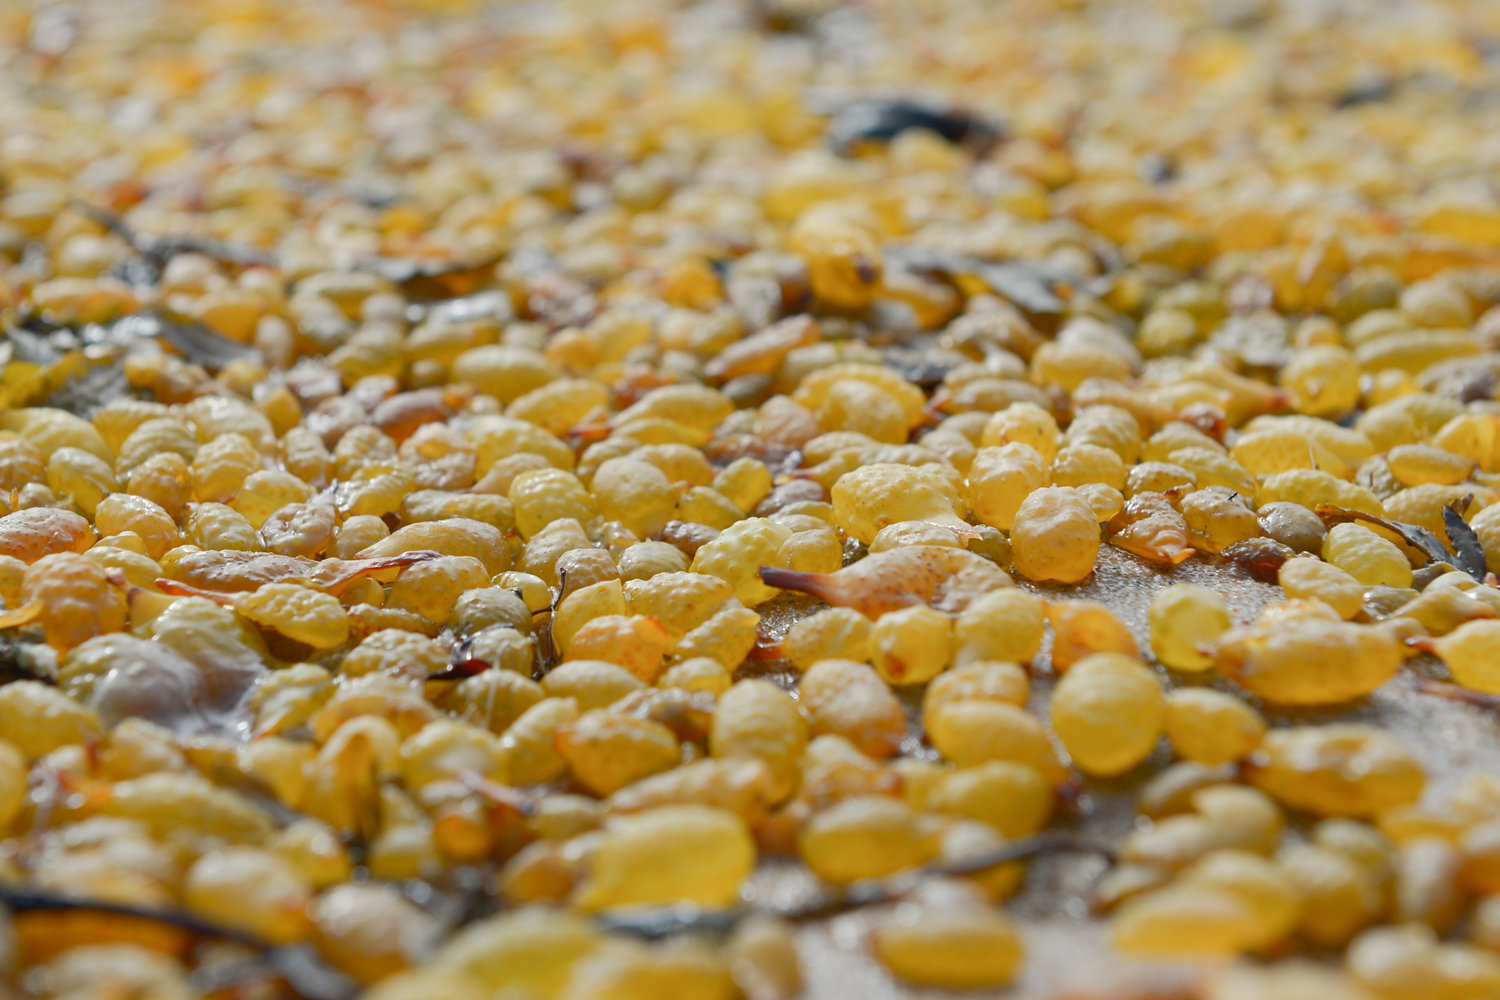 Fucus vesiculosus, commonly known as bladder wrack